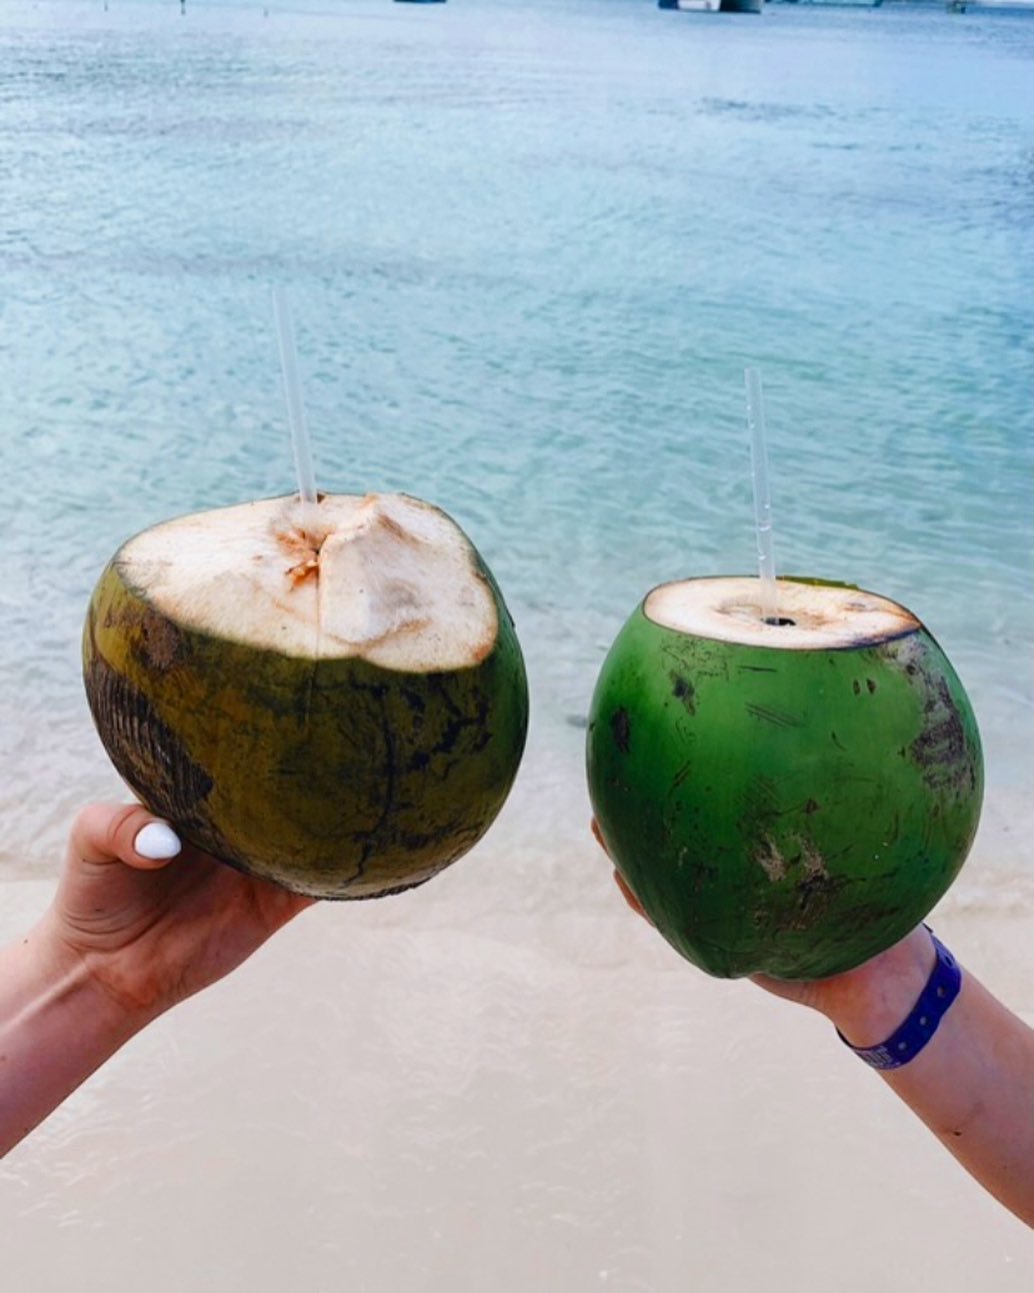 Best Popular Foods & Drinks to Try on Vacation in Jamaica